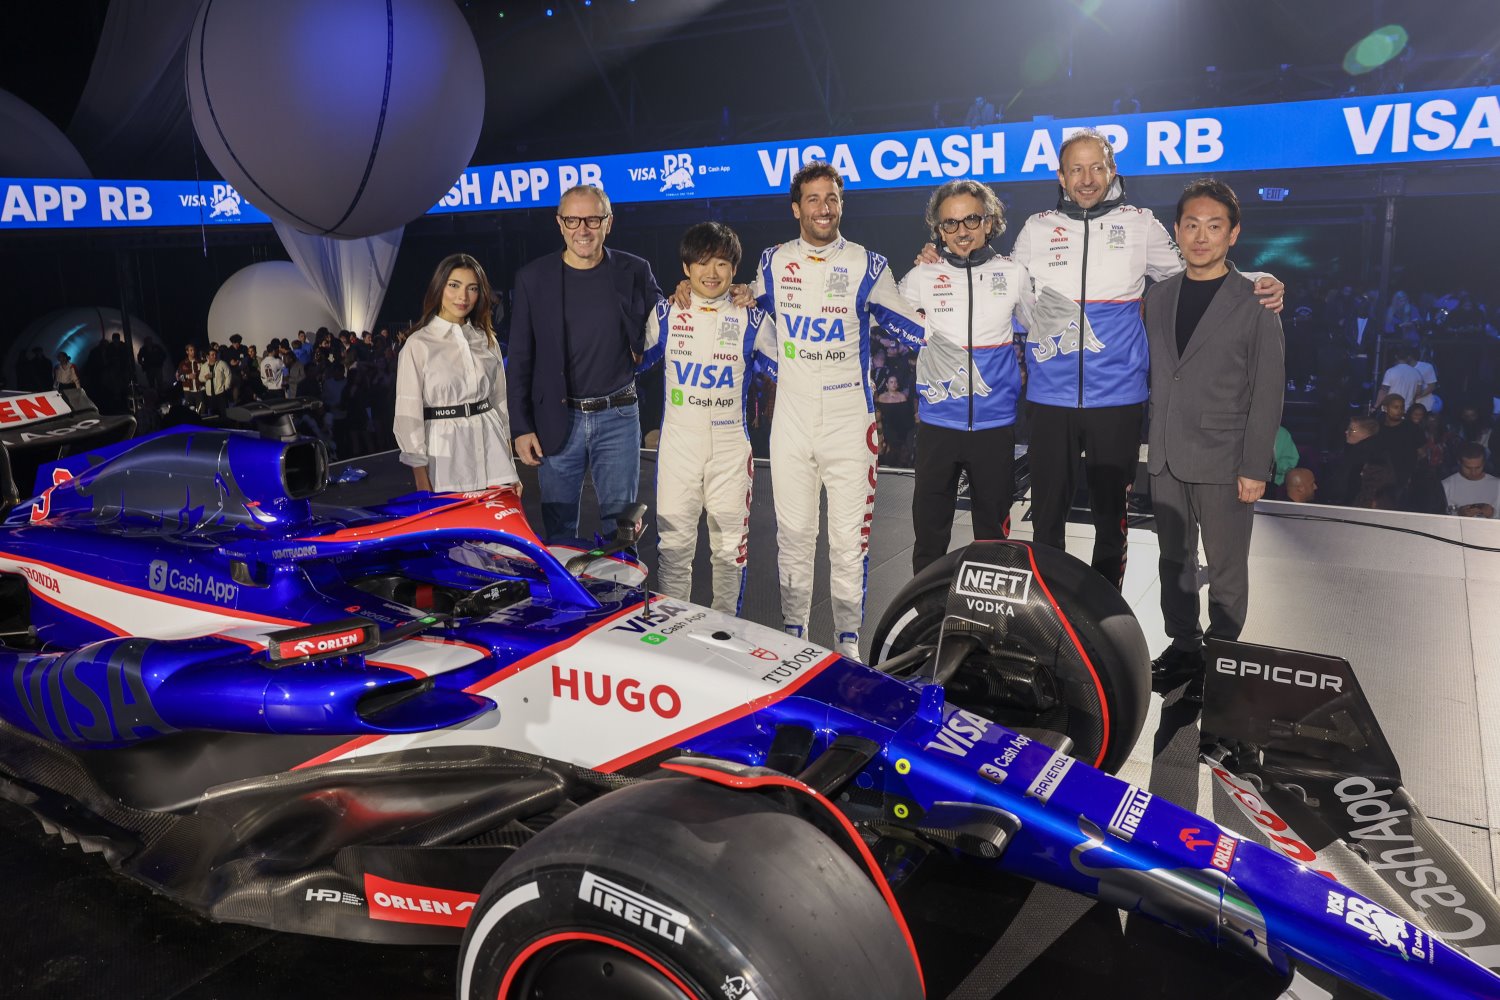 2024 Visa Cash App RB Car Launch in Las Vegas LAS VEGAS, NEVADA - FEBRUARY 08: (L-R) Amna Al Qubaisi of United Arab Emirates and Visa Cash App RB F1 Academy, Stefano Domenicali, CEO of the Formula One Group, Yuki Tsunoda of Japan and Visa Cash App RB, Daniel Ricciardo of Australia and Visa Cash App RB, Laurent Mekies, Team Principal of Visa Cash App RB, Peter Bayer, CEO of Visa Cash App RB and Koji Watanabe, President of HRC pose for a photo at the Visa Cash App RB Livery Launch Event Las Vegas on February 08, 2024 in Las Vegas, Nevada. (Photo by Jesse Grant/Getty Images for Visa Cash App RB) // Getty Images / Red Bull Content Pool